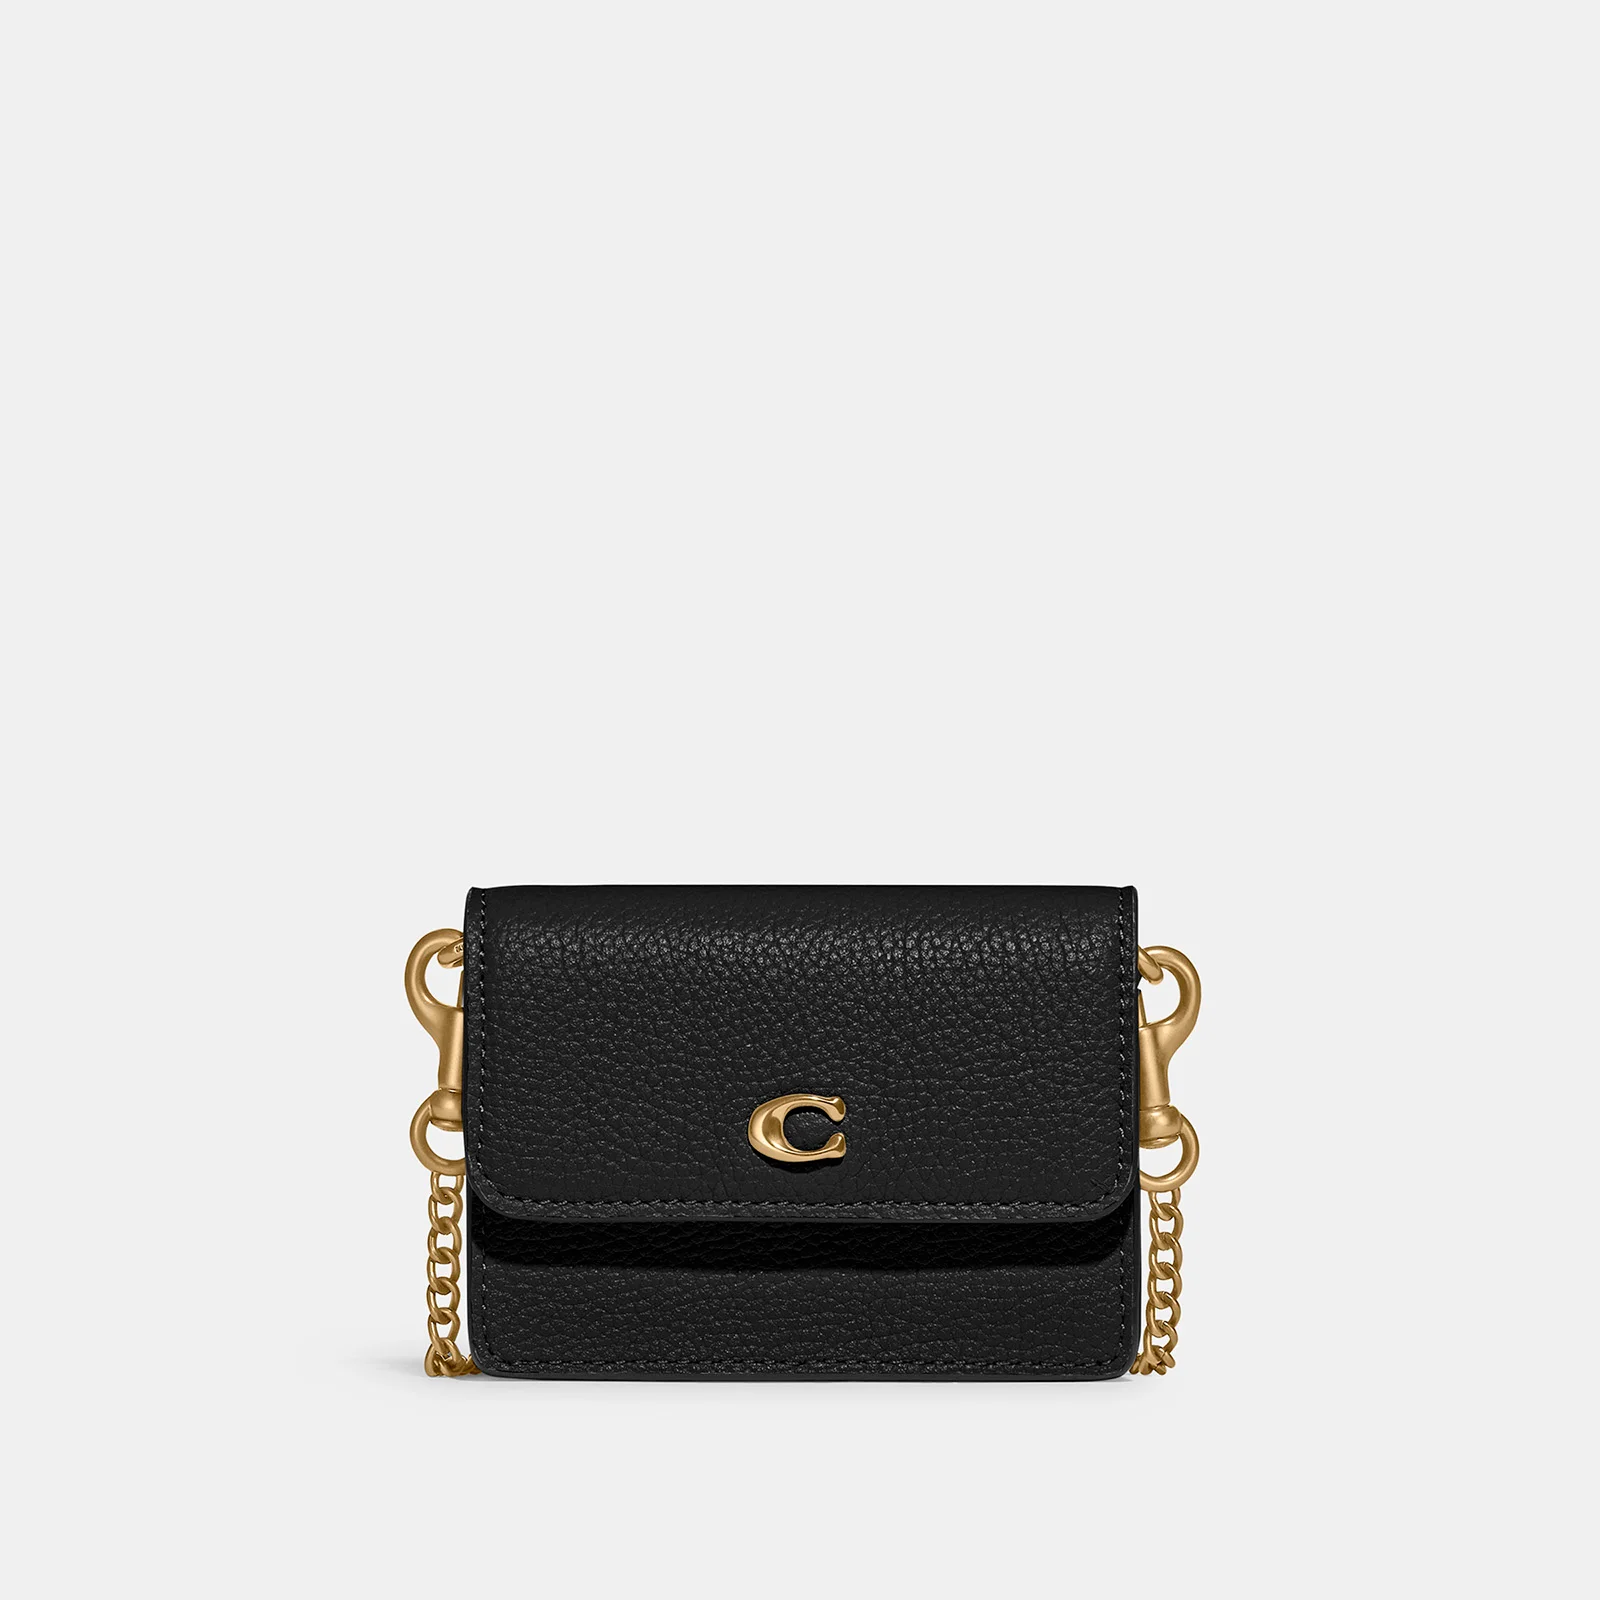 Coach Women's Refined Calf Leather Card Case With Chain - Black Image 1